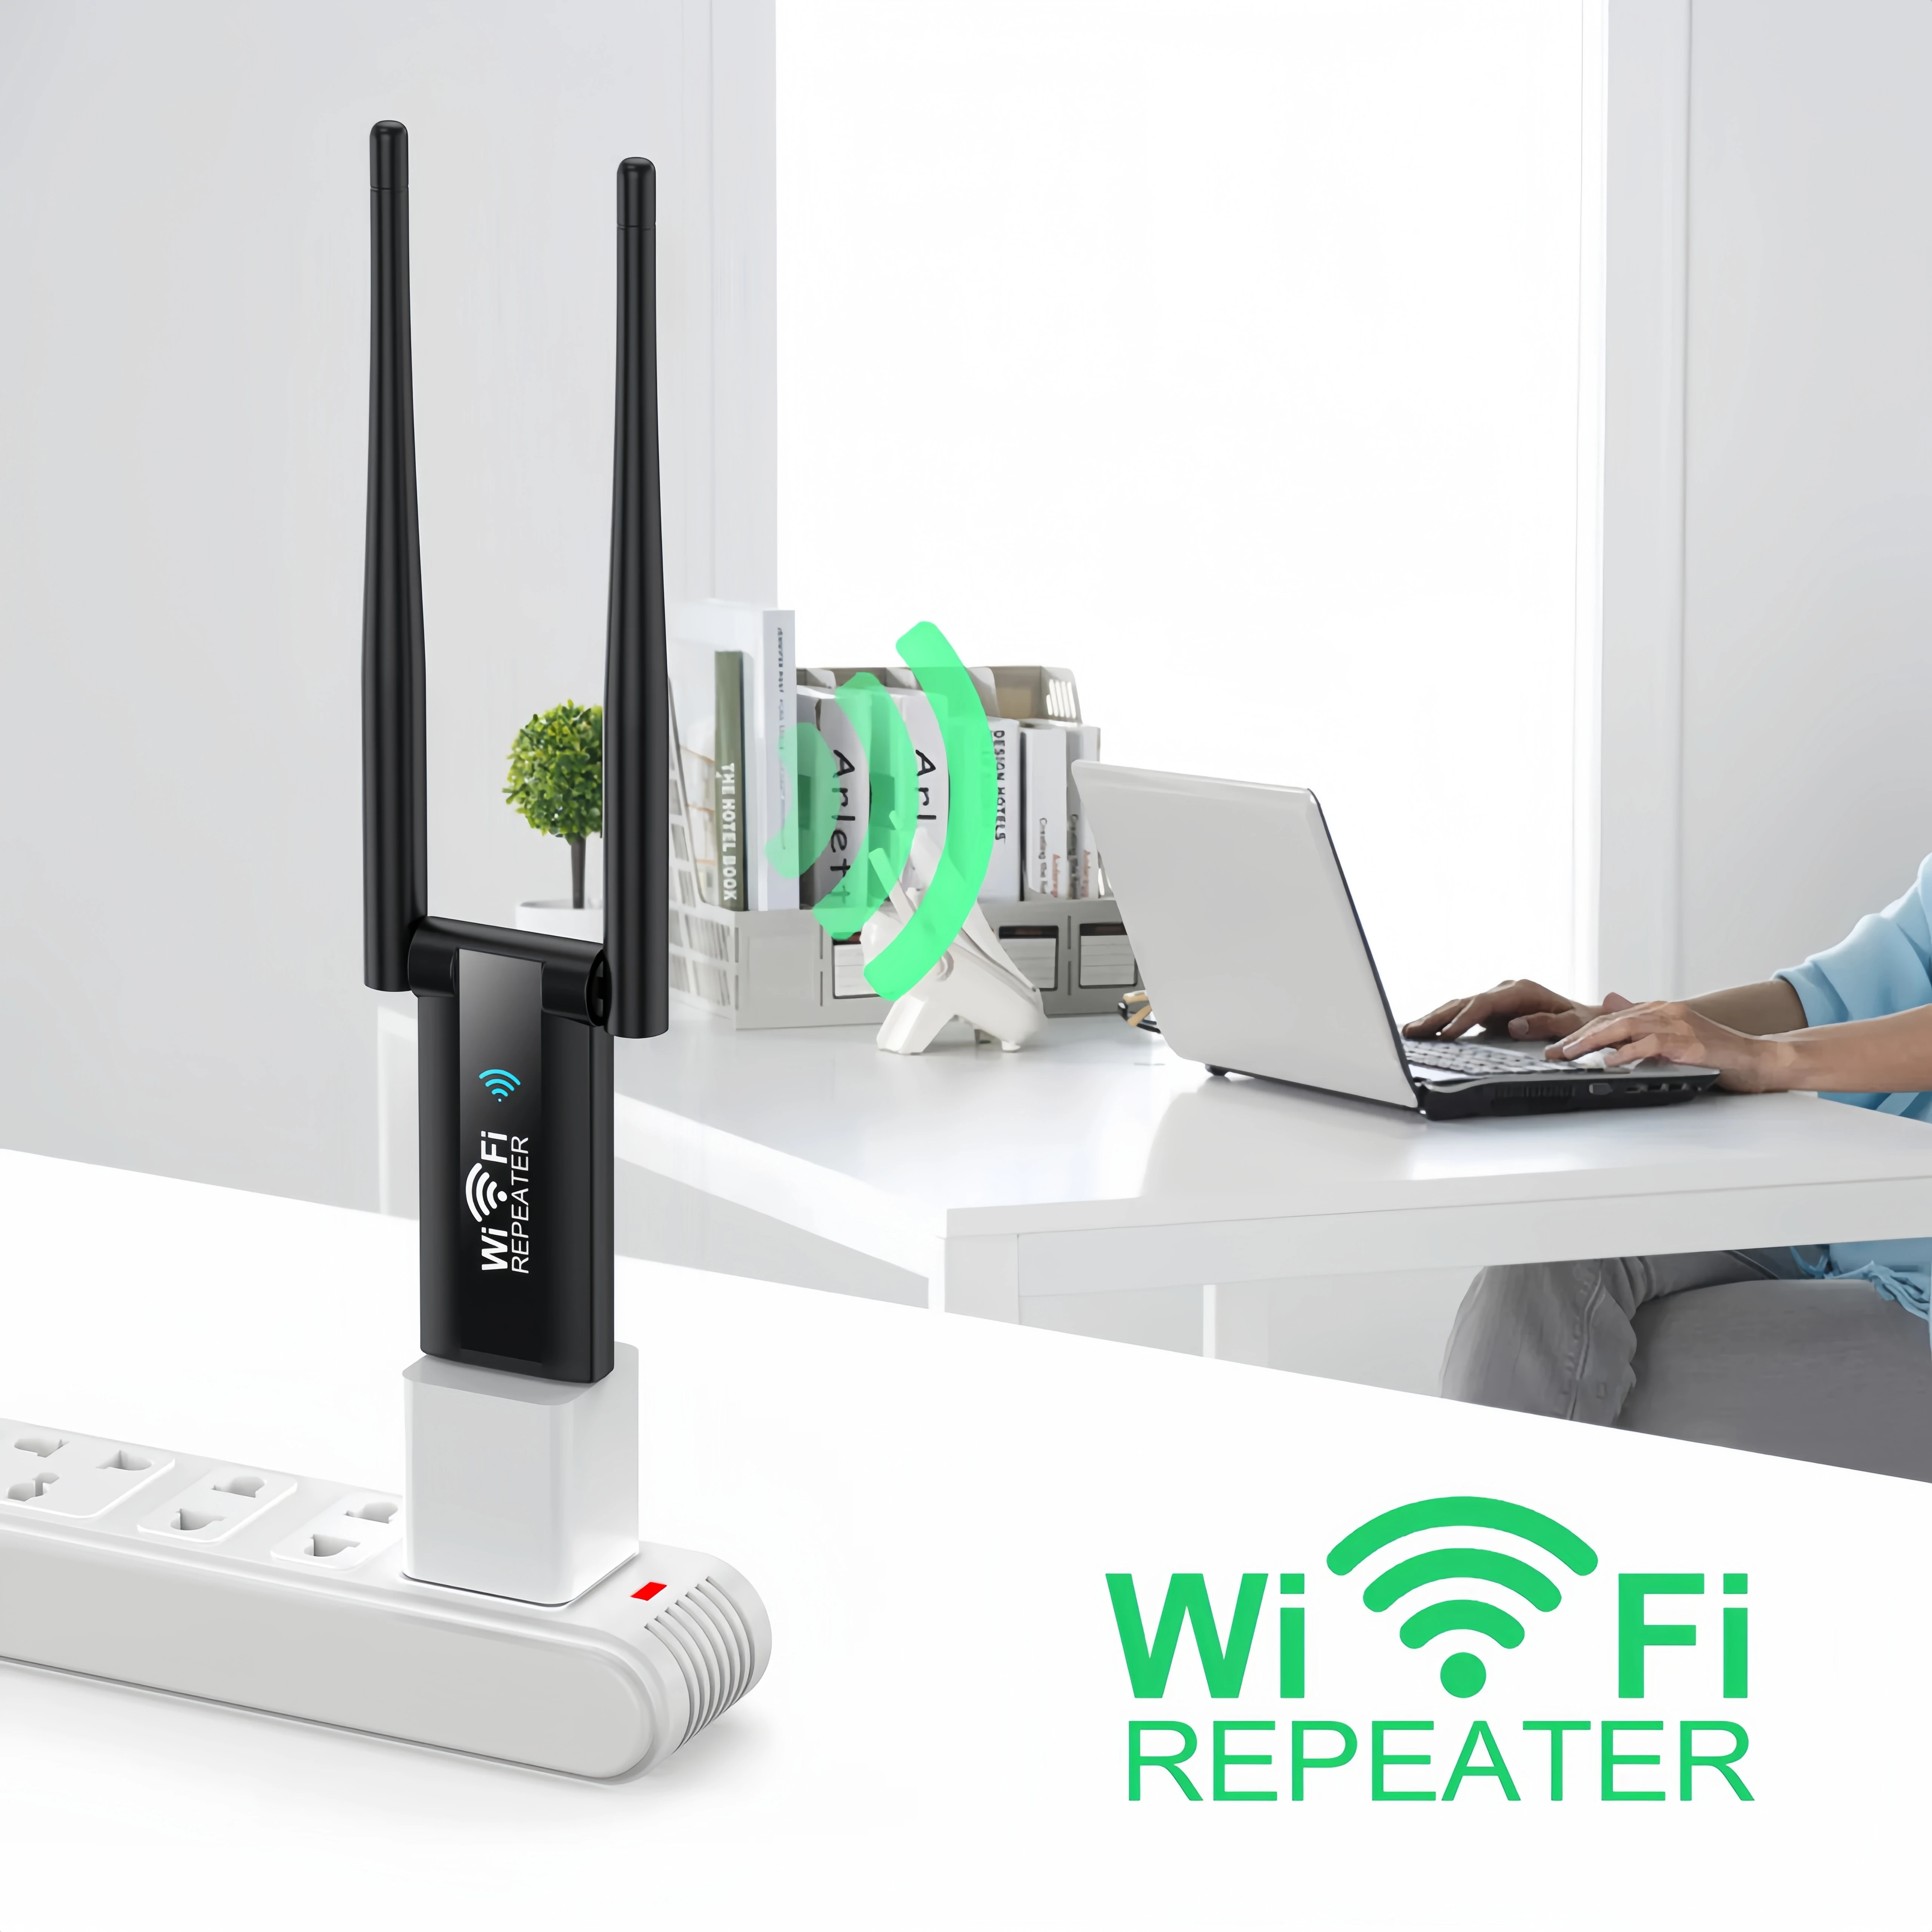 USB Wireless WiFi Repeater 2.4G 300Mbps Extender Router WiFi Signal Amplifier Booster Remote Wi-Fi Small And Convenient for PC